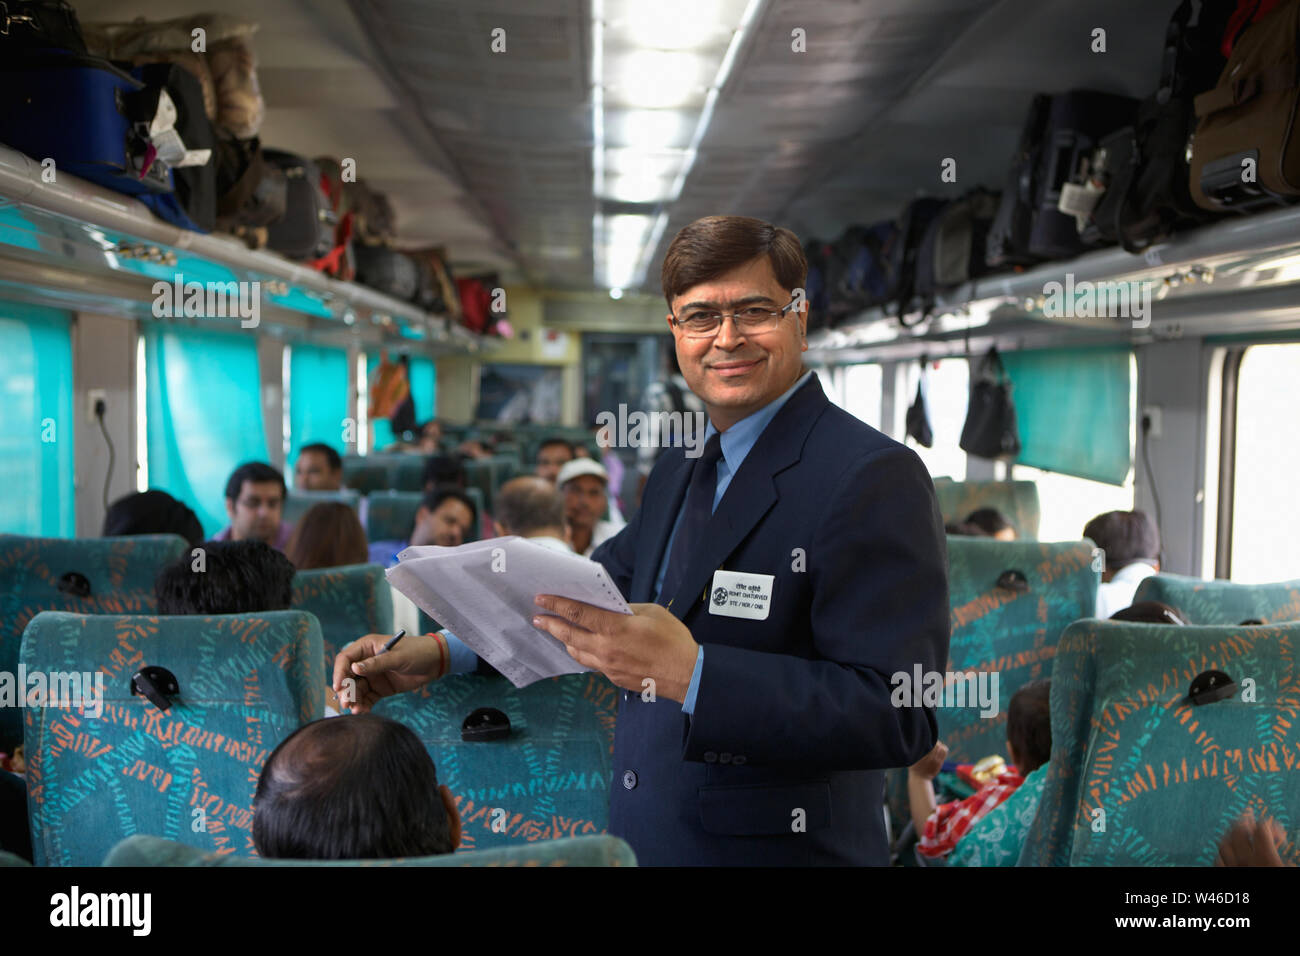 Ticket collector checking tickets in a train Stock Photo